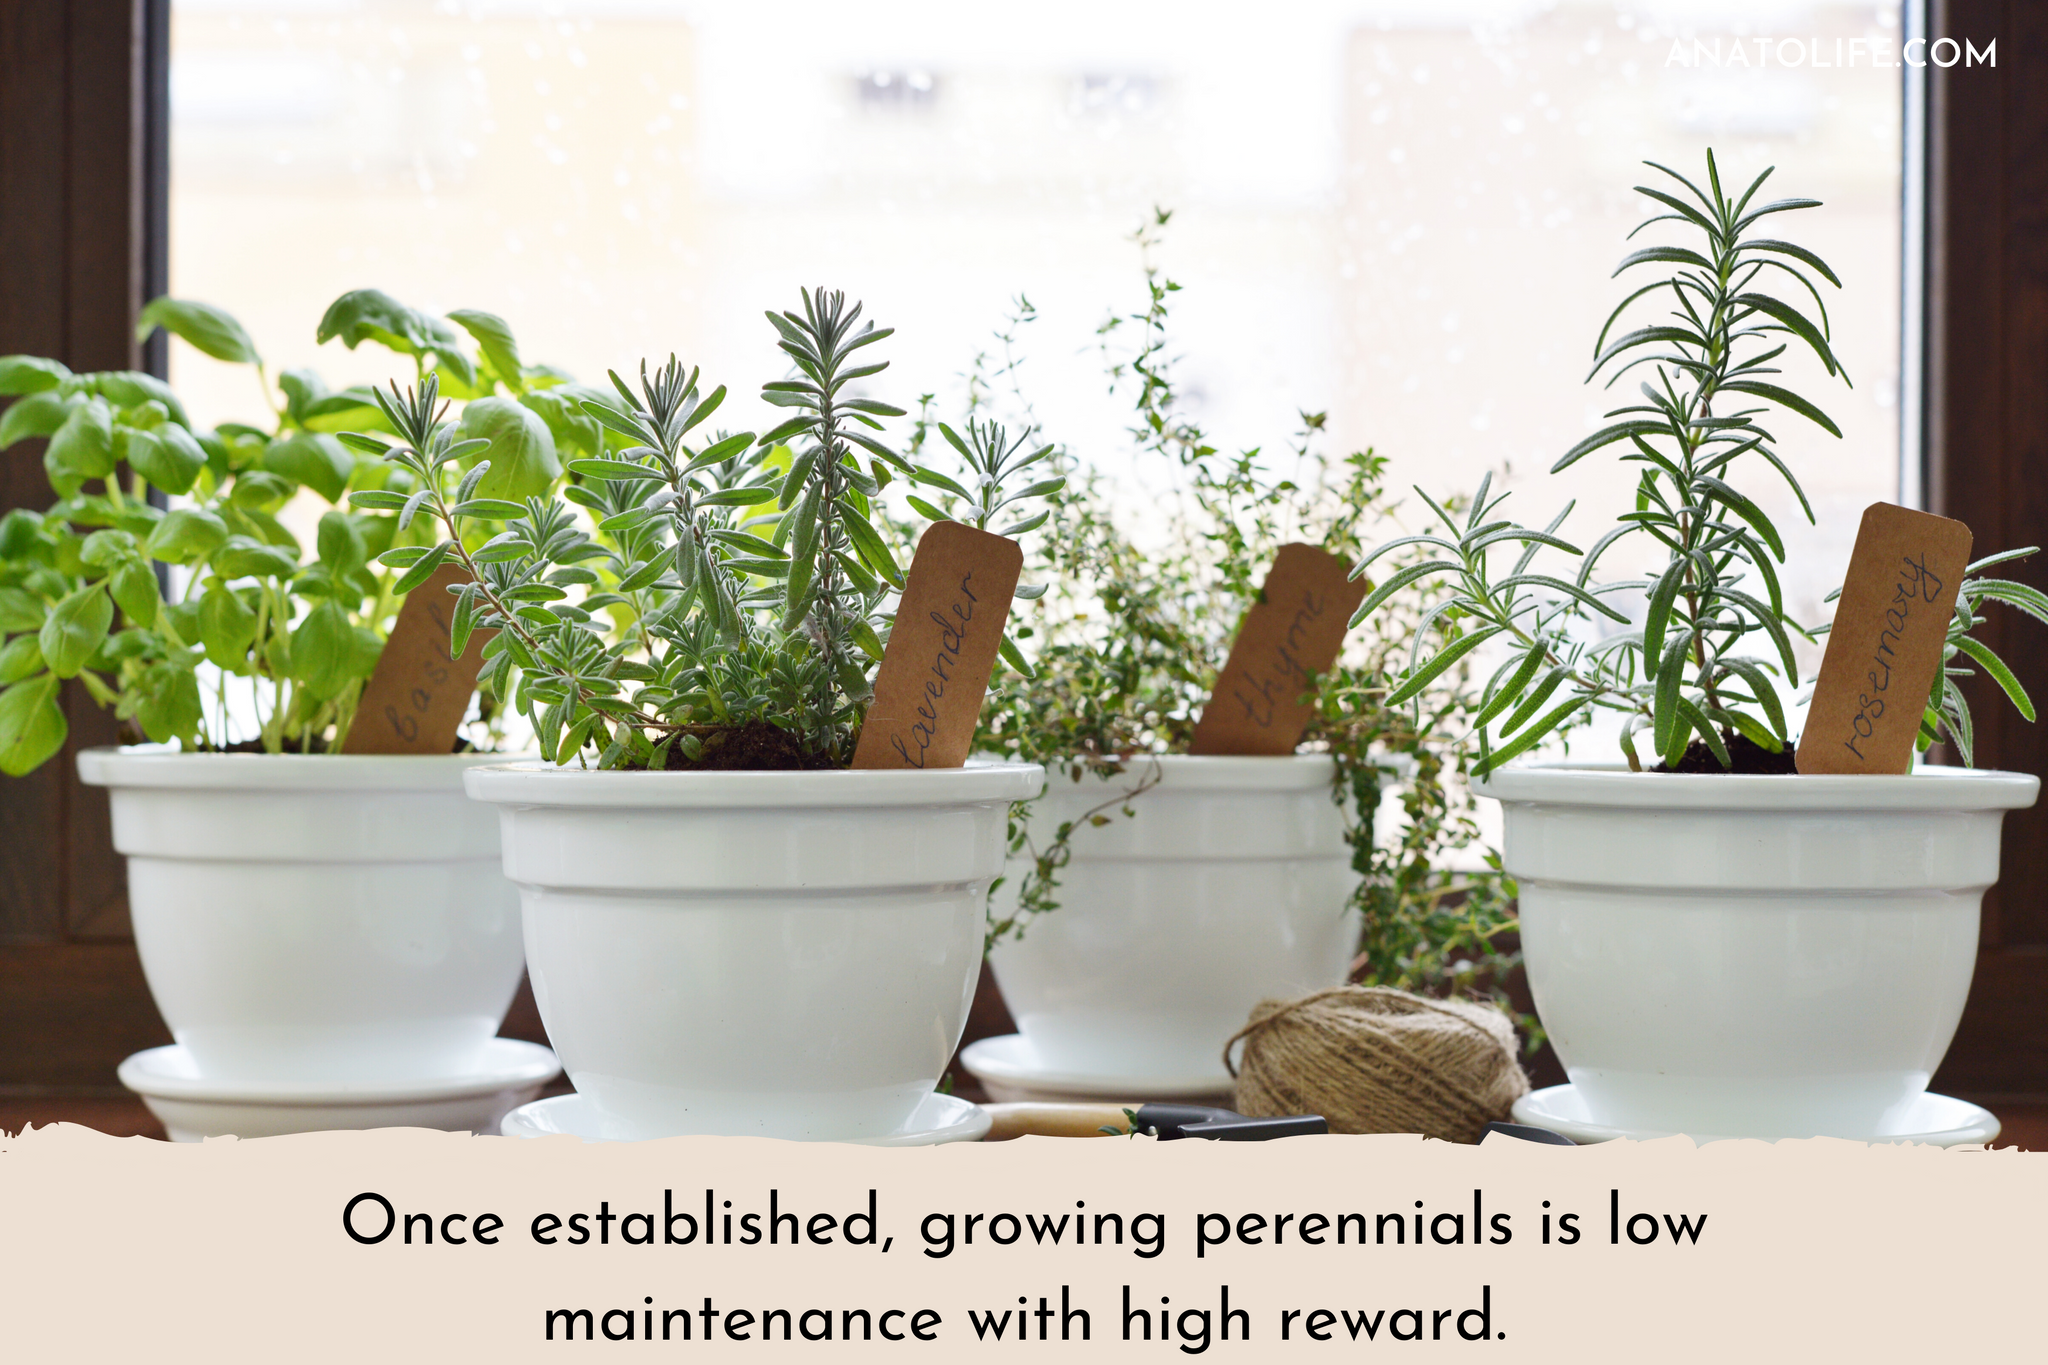 Growing Perennials at home by Anato Regenerative Skincare